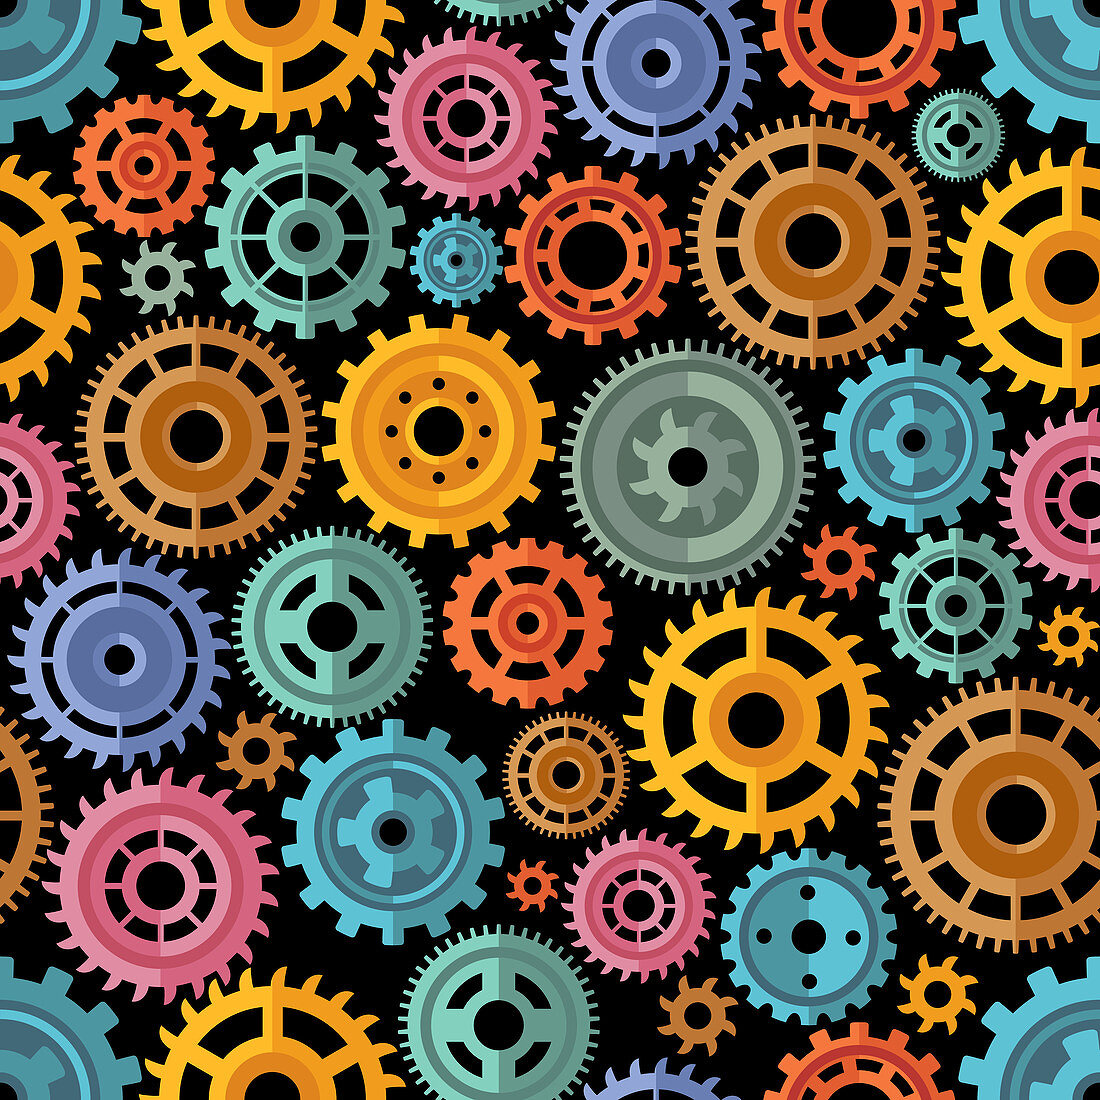 Cogs and gears, illustration